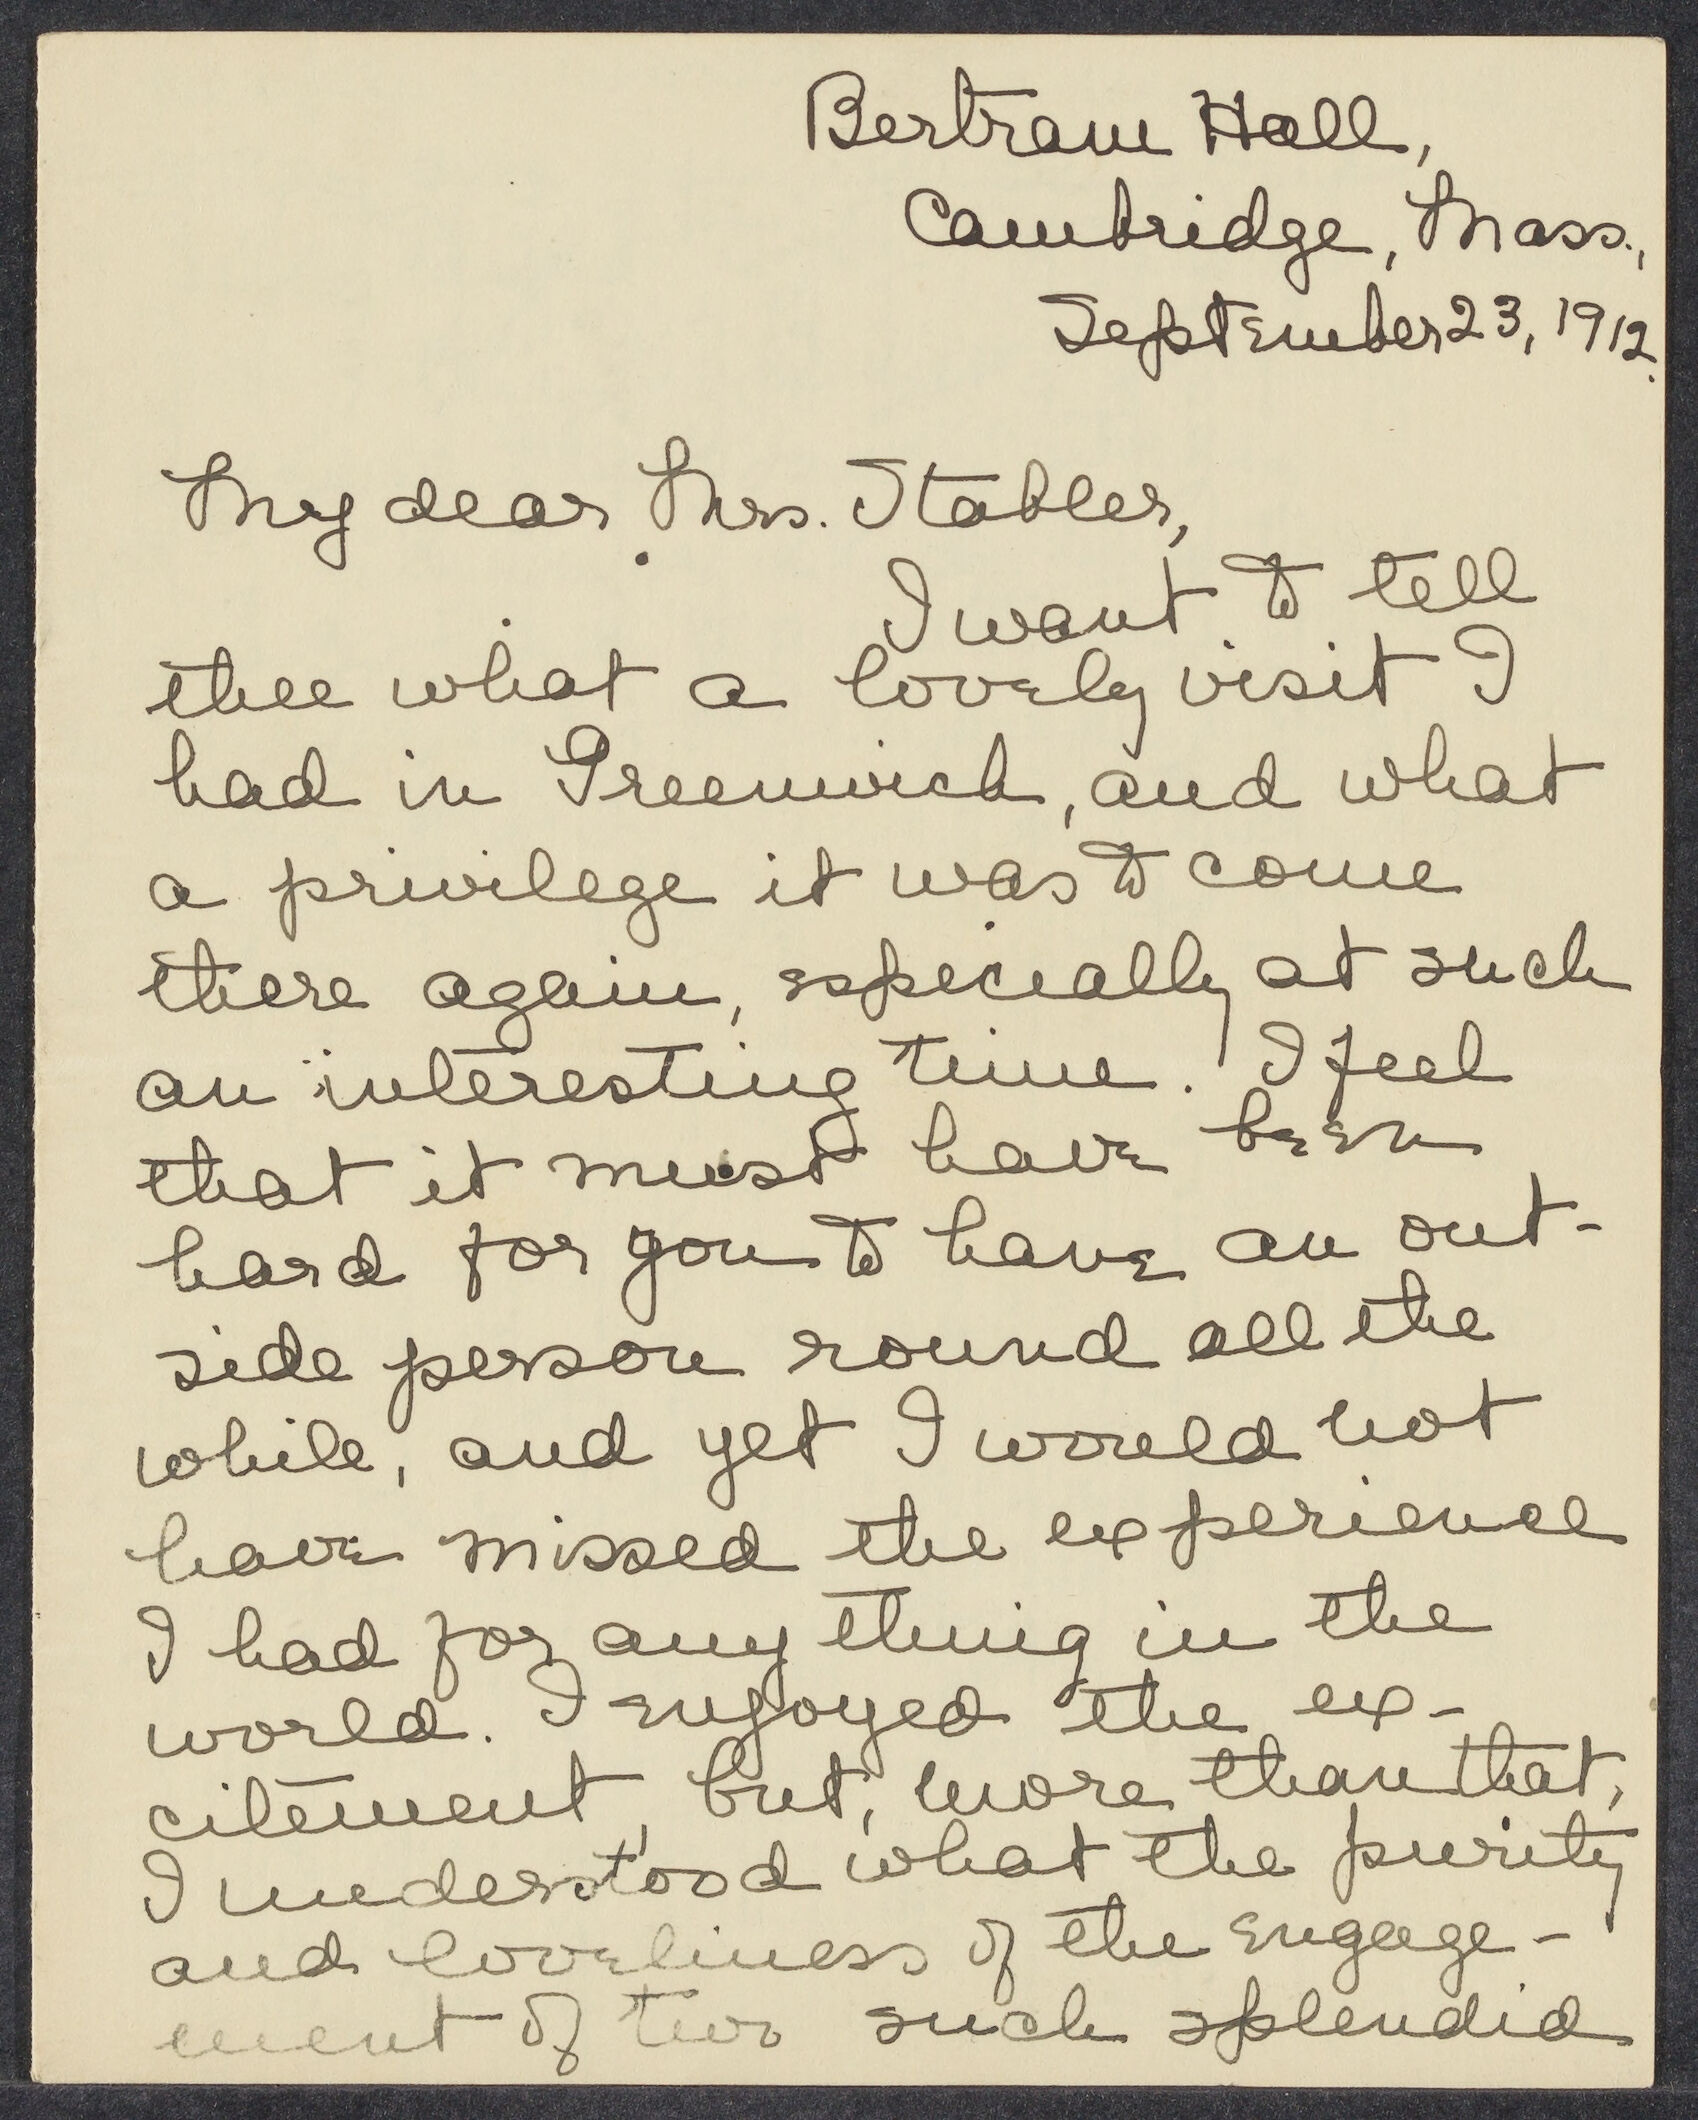 Letters from others to Eleanor Stabler Brooks, including Frances Brooks and sister Anna Bunker Stabler, 1912-1914